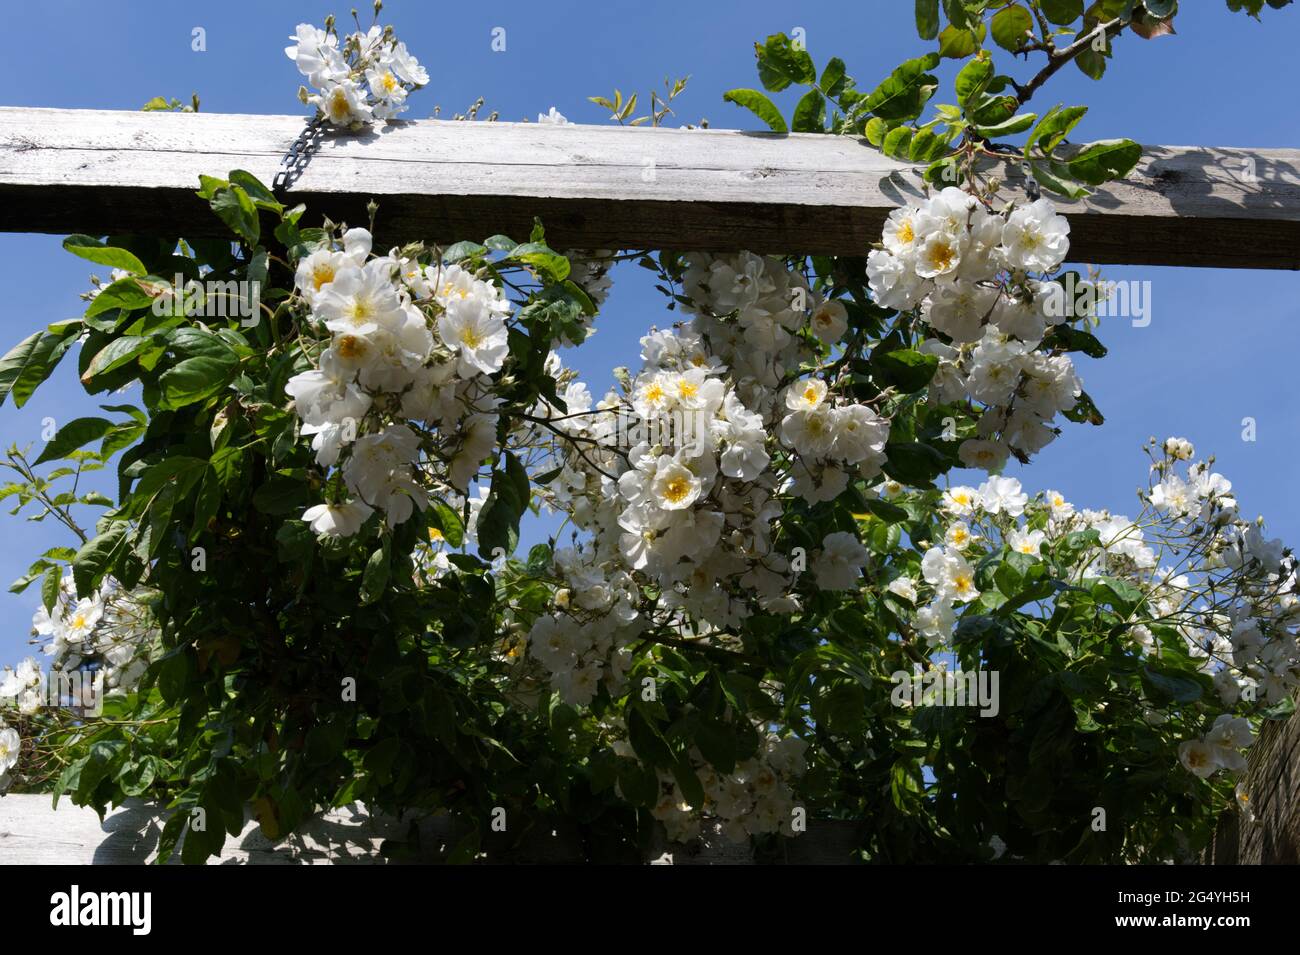 Summer roses in bloom on the pergola at Southsea rose garden, June 2021, Hampshire England UK Stock Photo